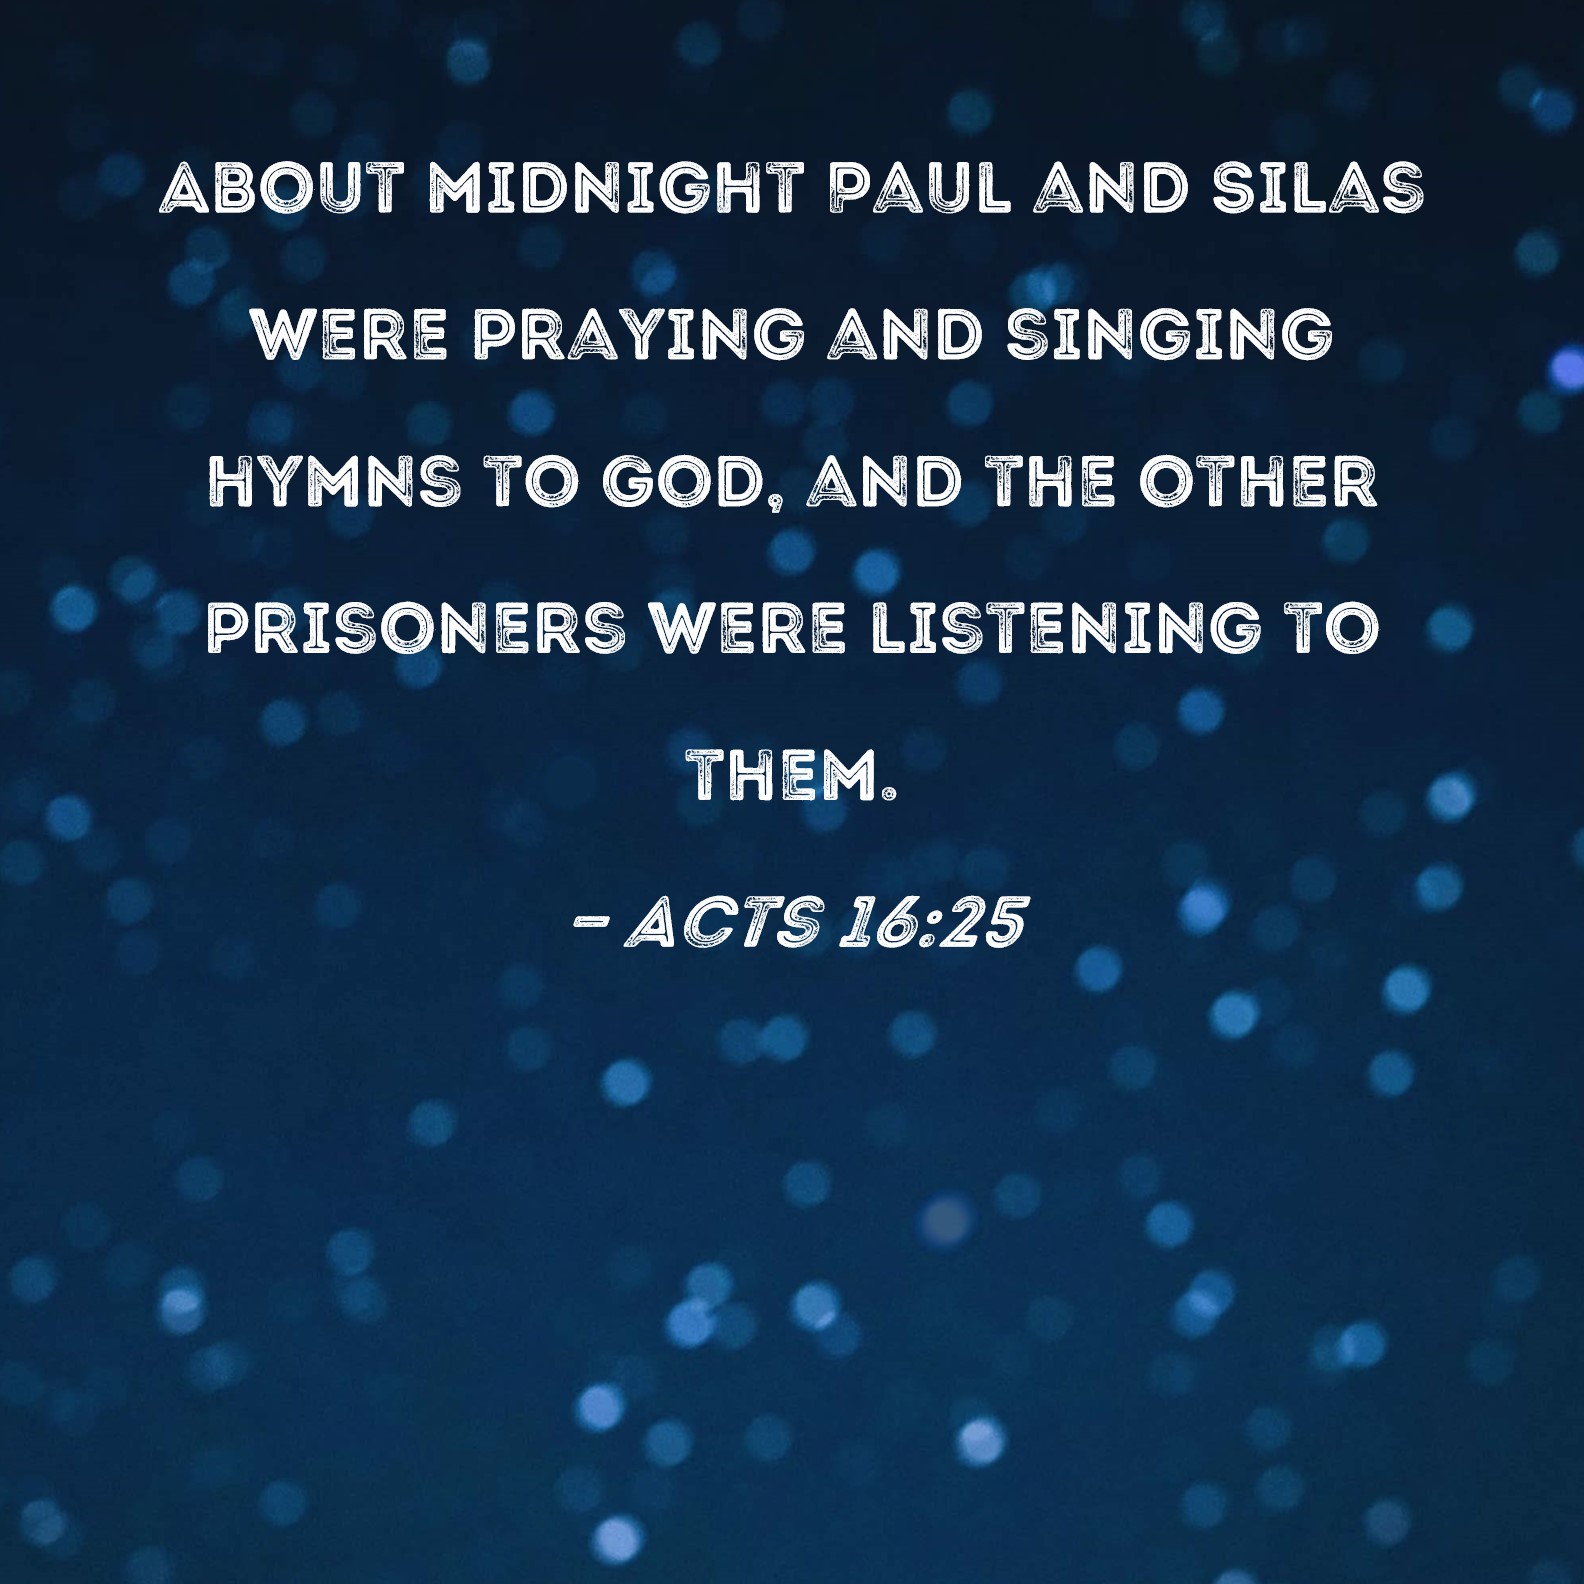 Acts 16:25 About midnight Paul and Silas were praying and singing hymns to  God, and the other prisoners were listening to them.